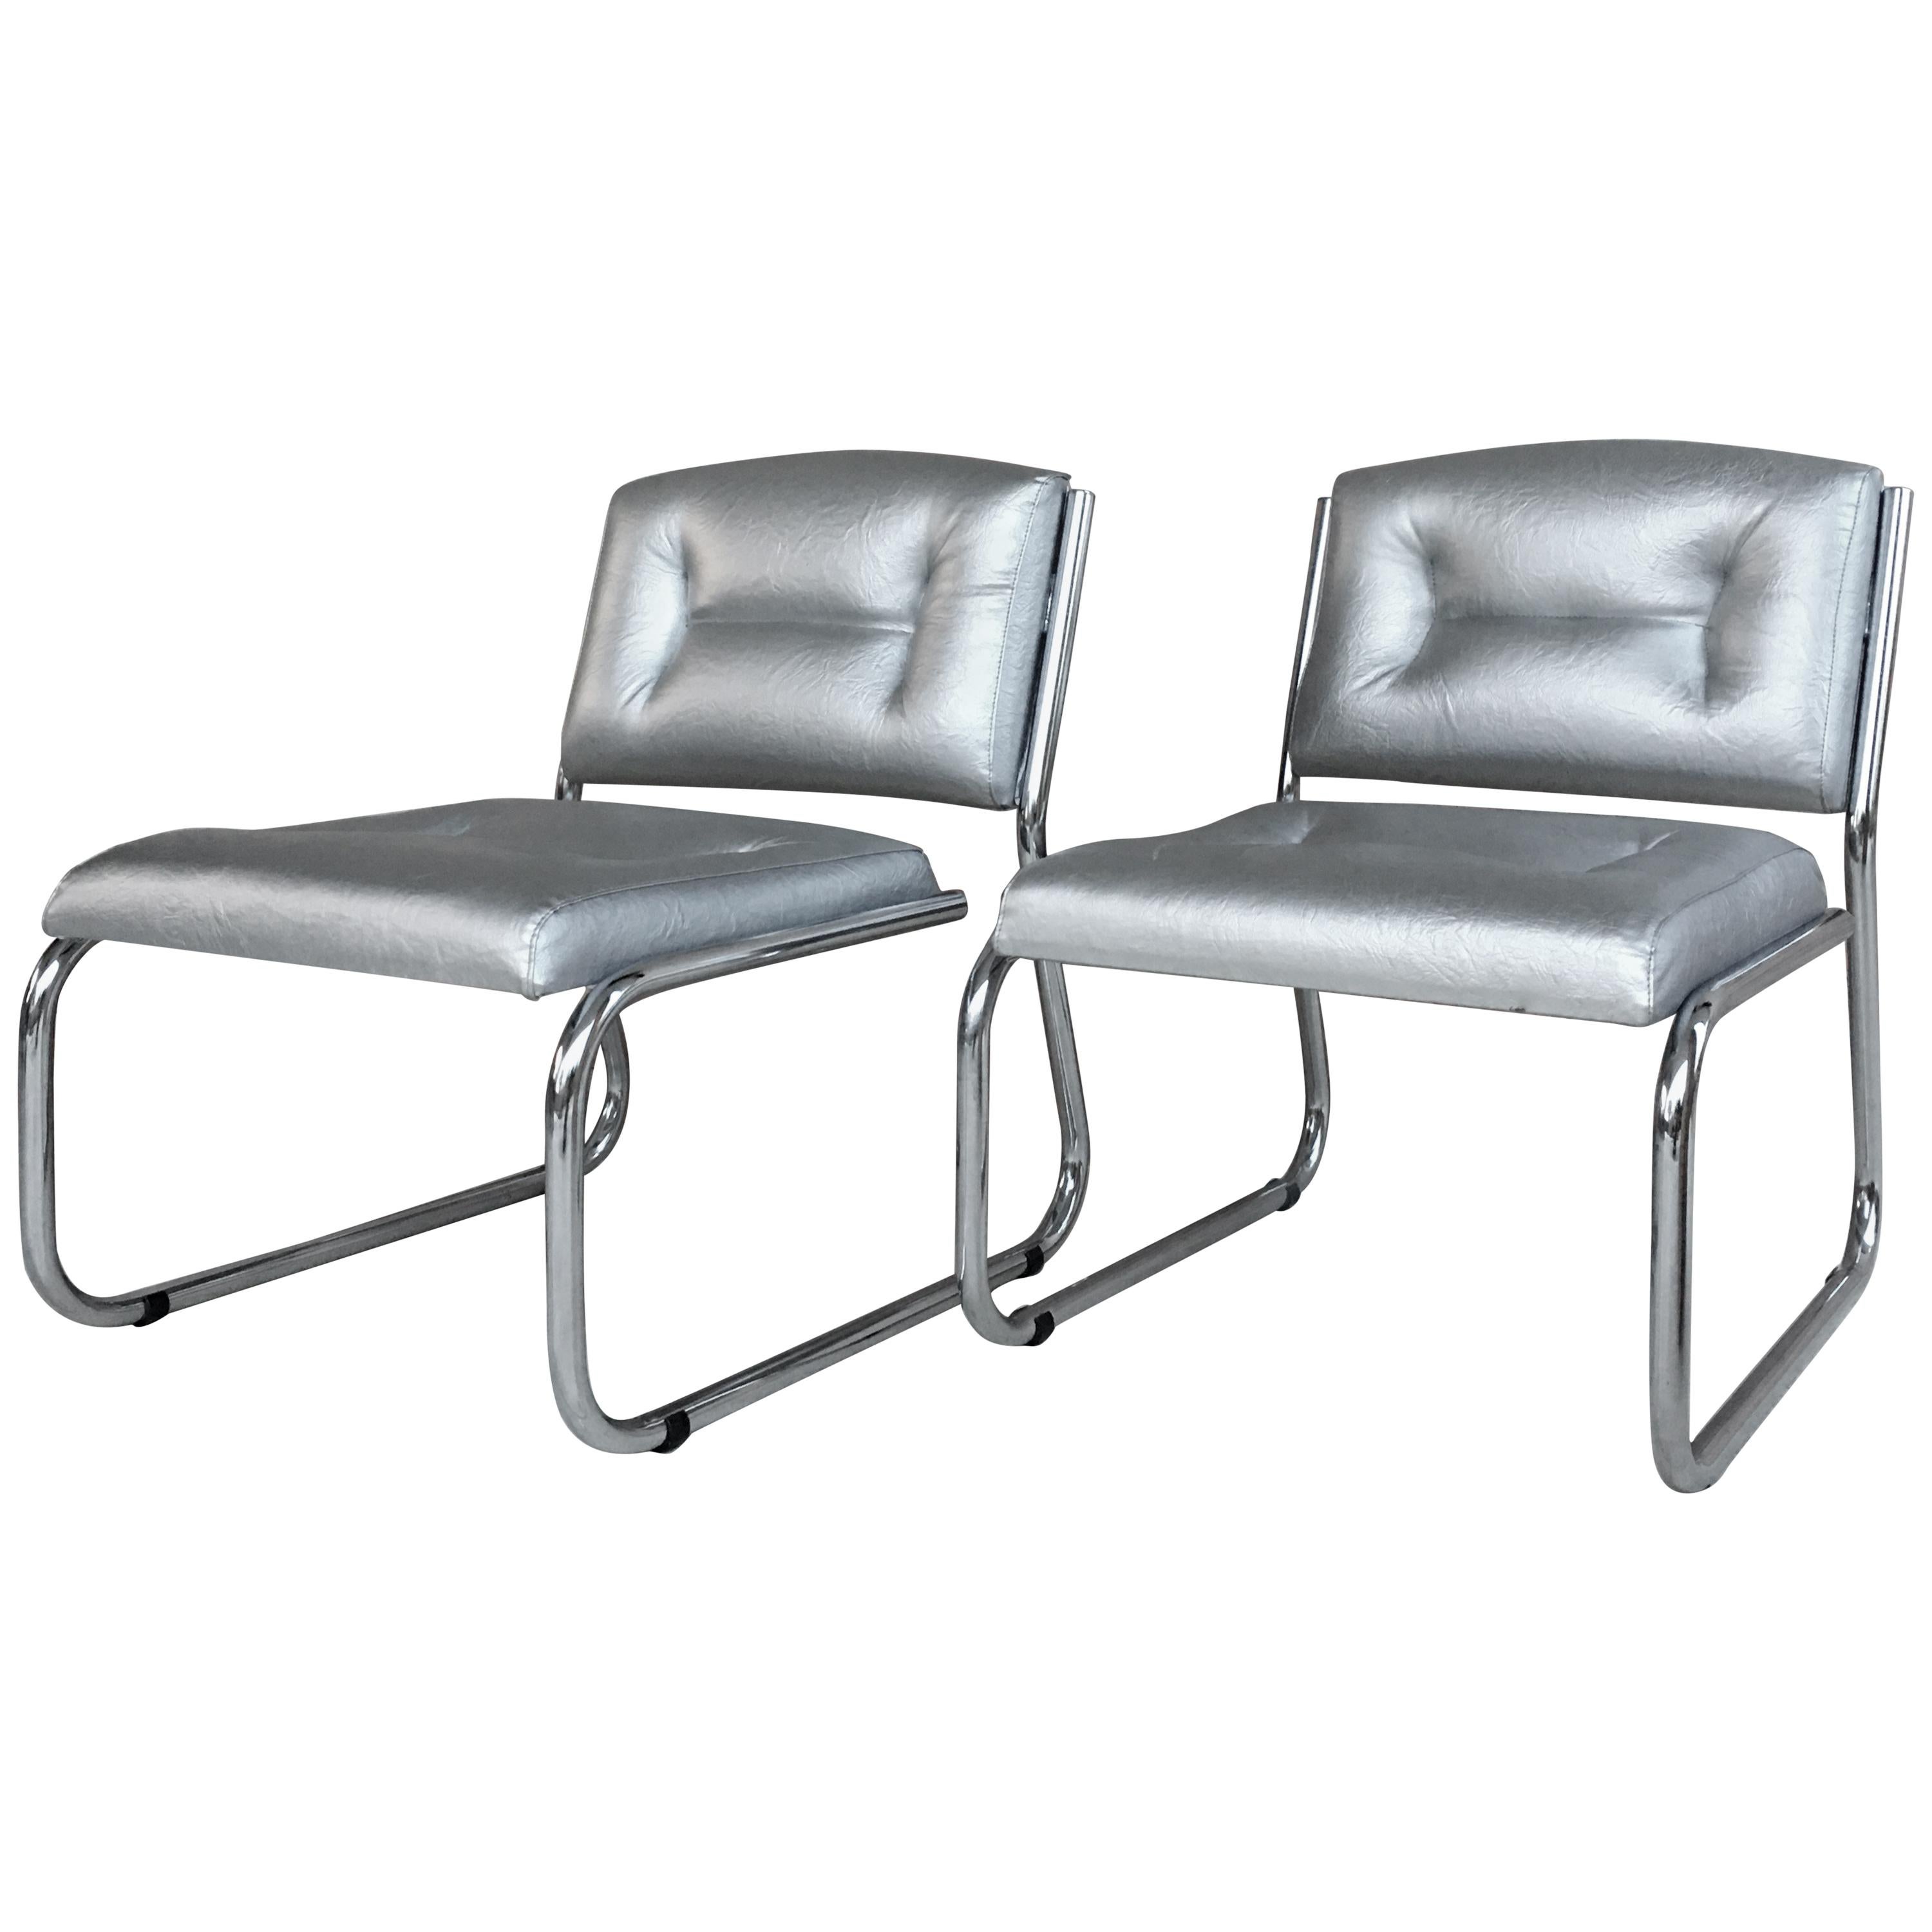 Pair of Art Deco Tubular Chrome Lounge Chairs in Silver Faux Leather